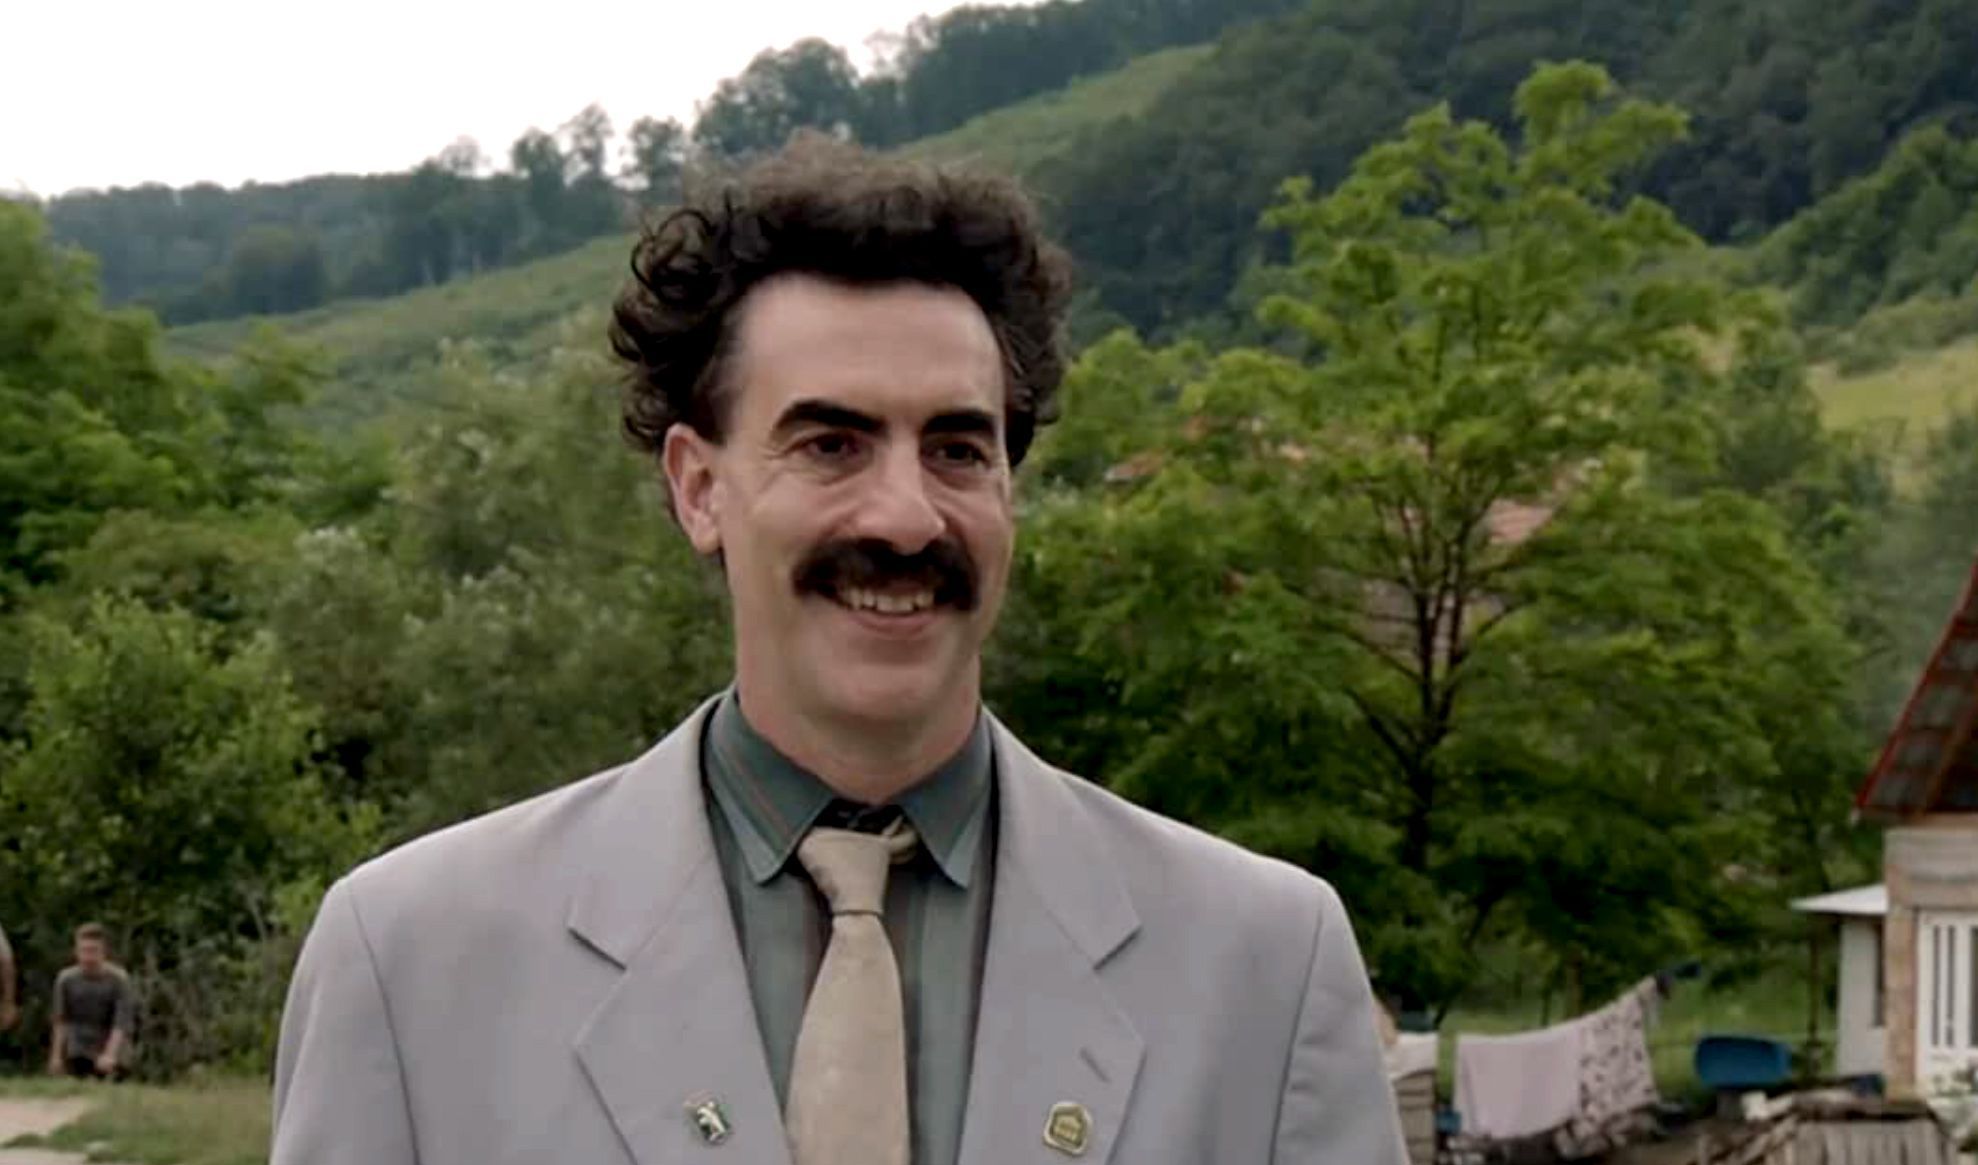 Review: Sacha Baron Cohen's Borat Sequel Is A Jaw Dropping Masterpiece Of Cringe Comedy Globe And Mail